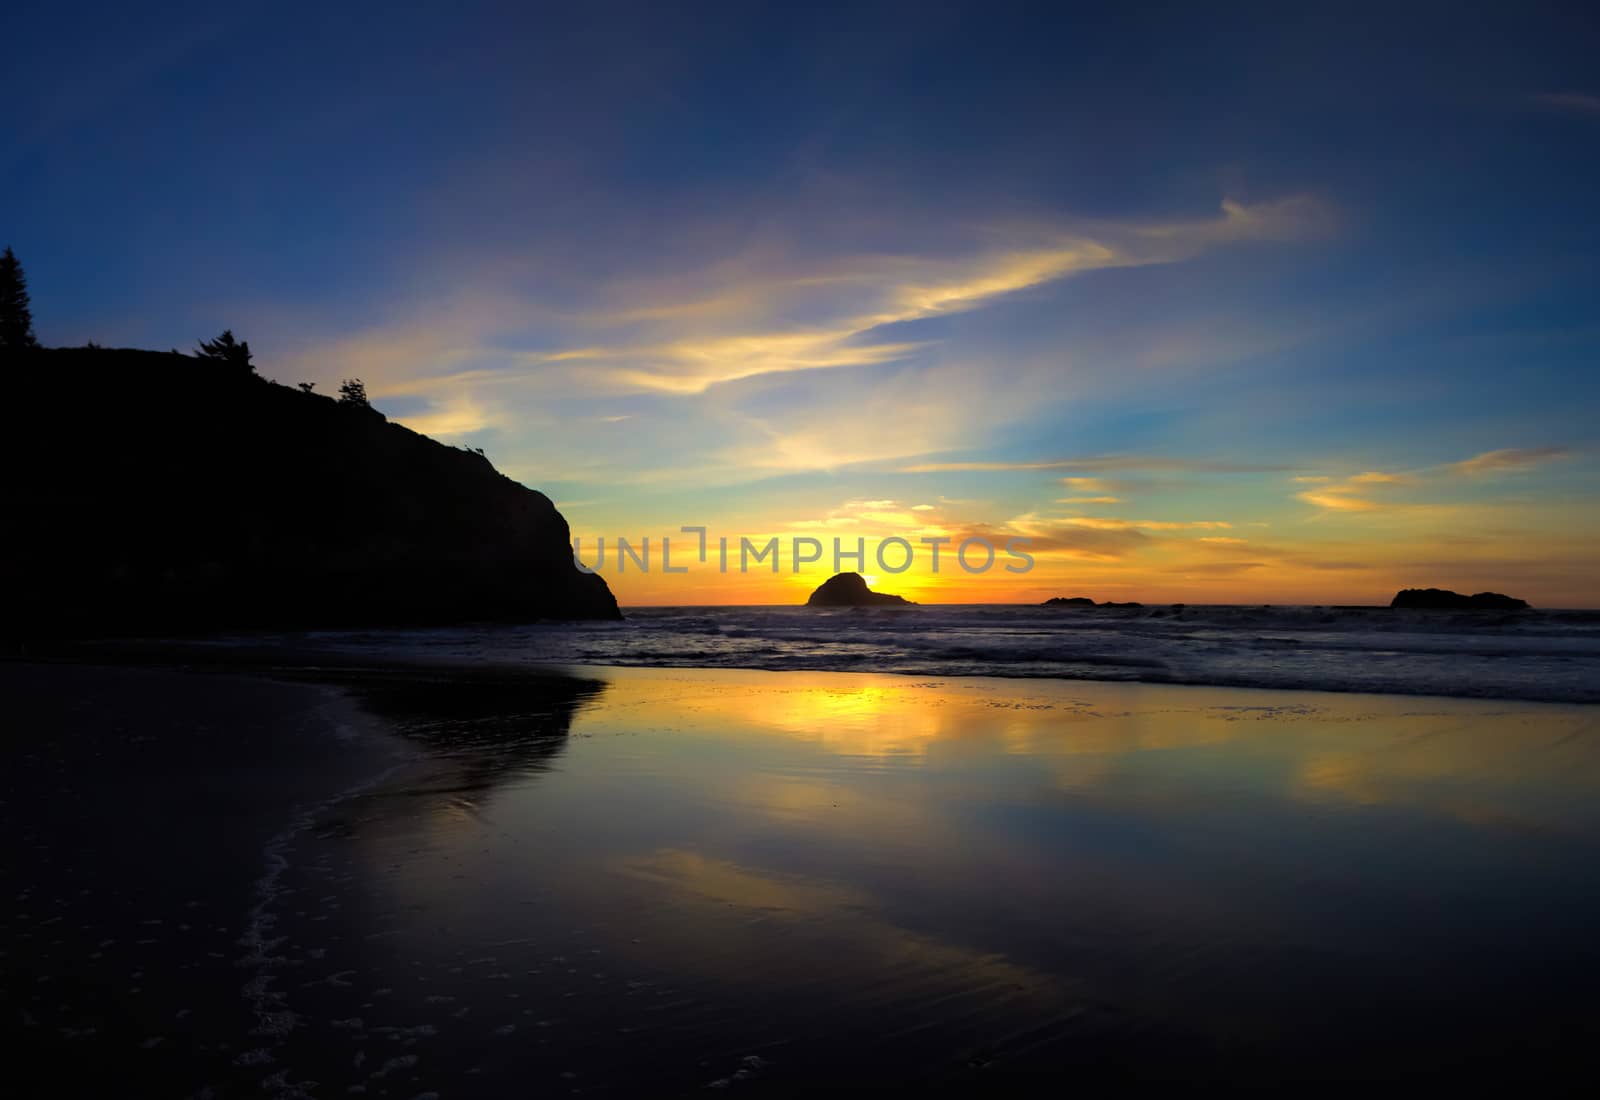 The Beach at Sunset by backyard_photography